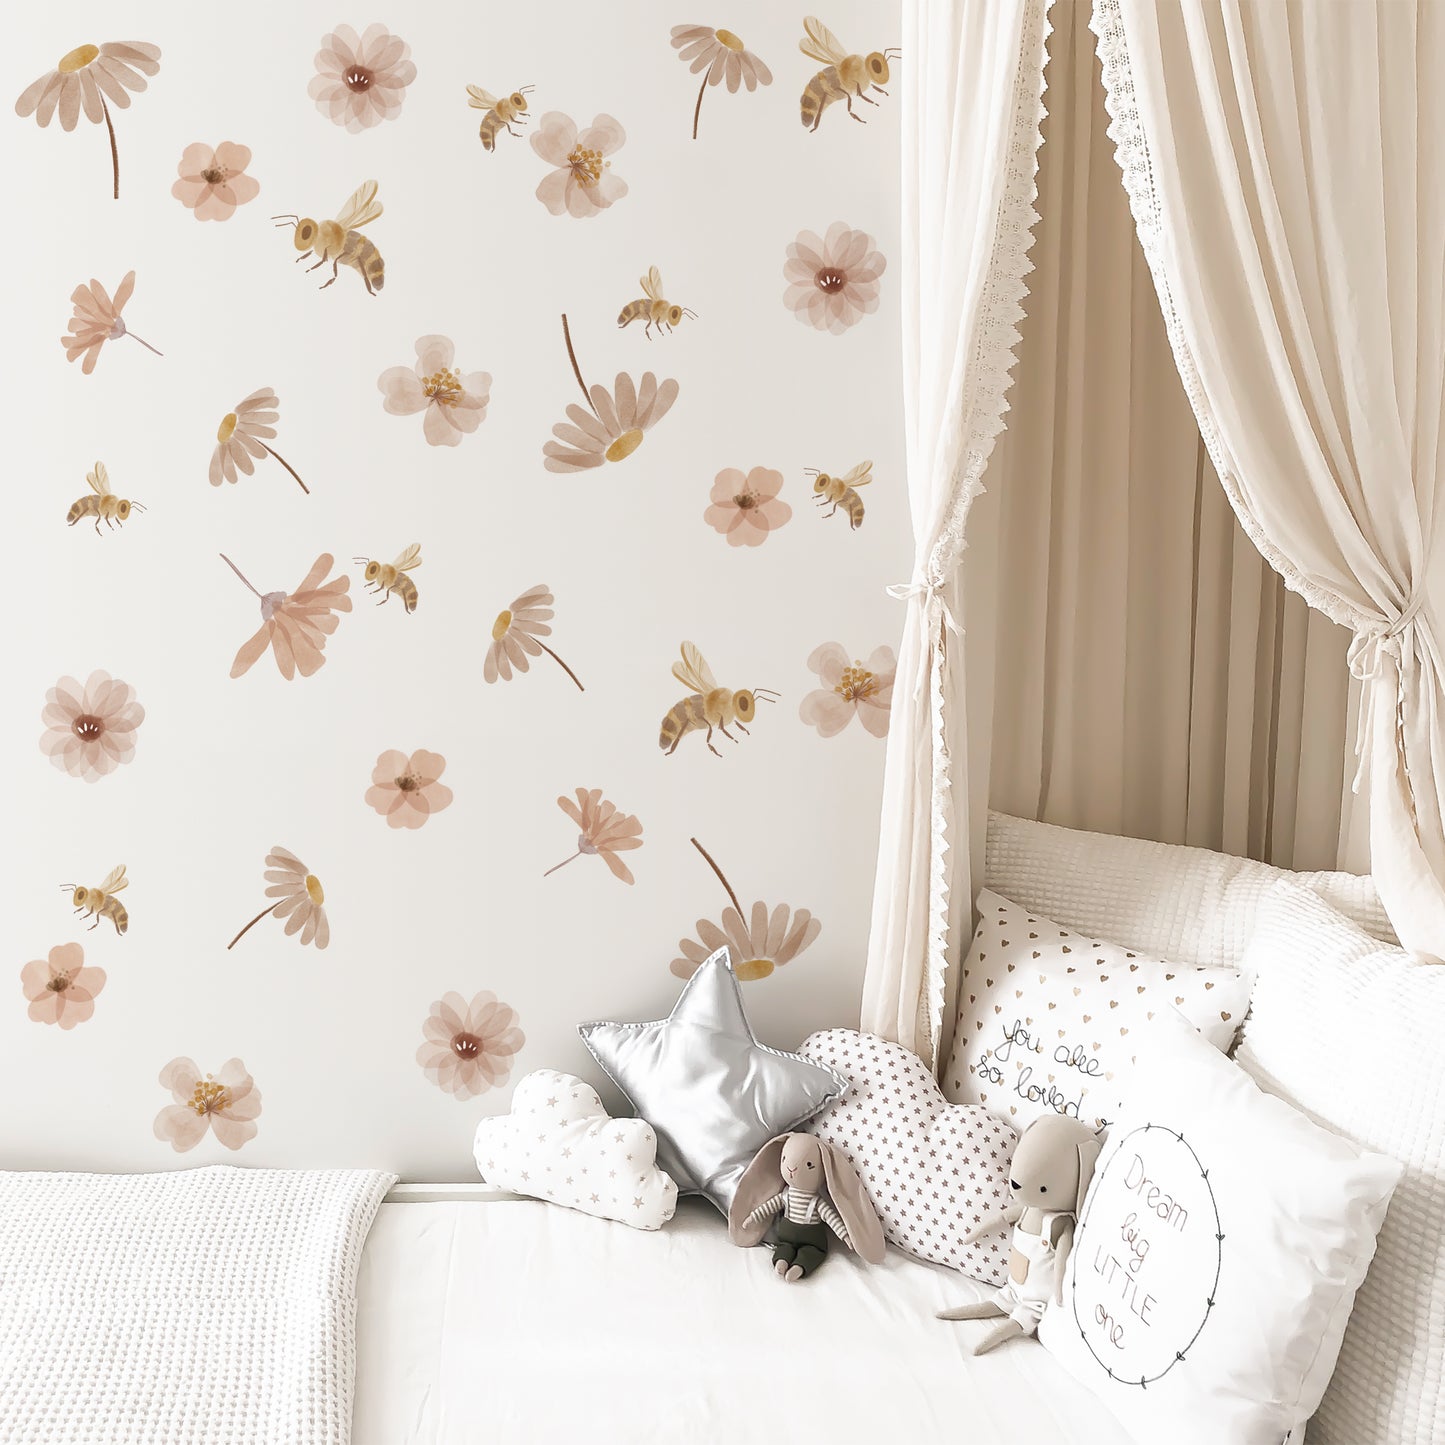 Flower and Bee - Wall Decals - Wall Decals - Fable and Fawn 